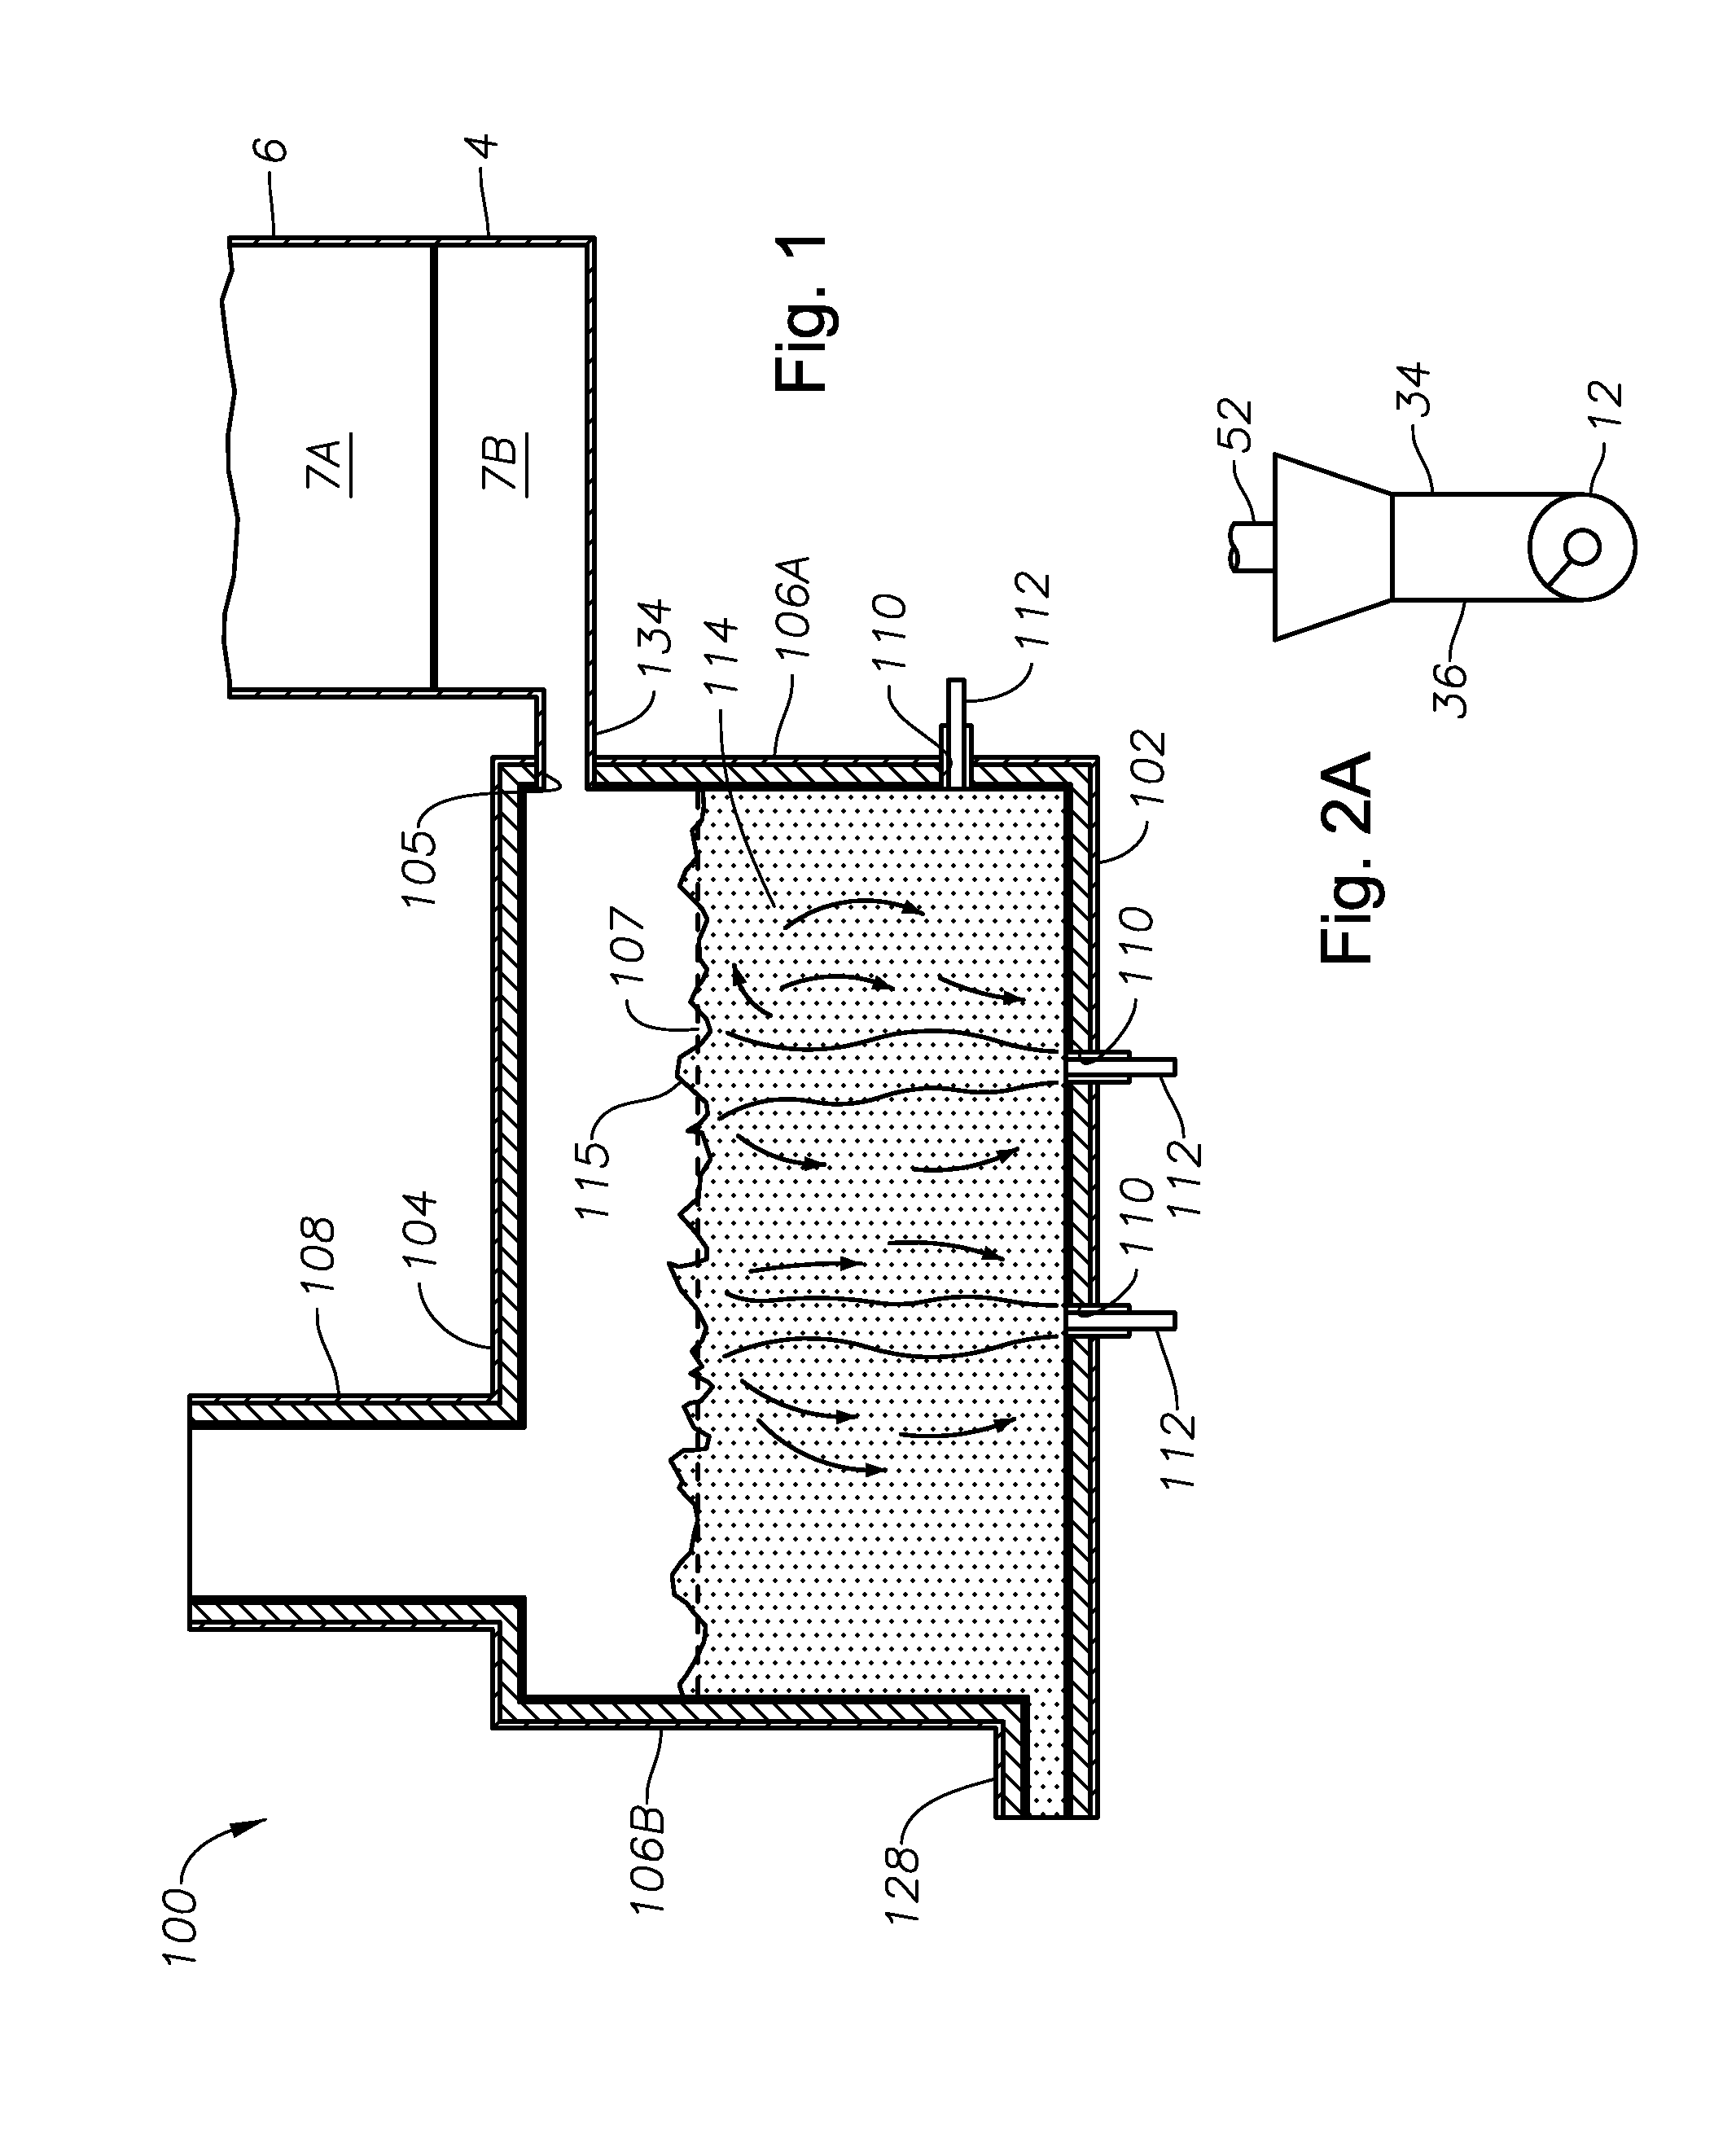 Processes for producing molten glasses from glass batches using turbulent submerged combustion melting, and systems for carrying out such processes